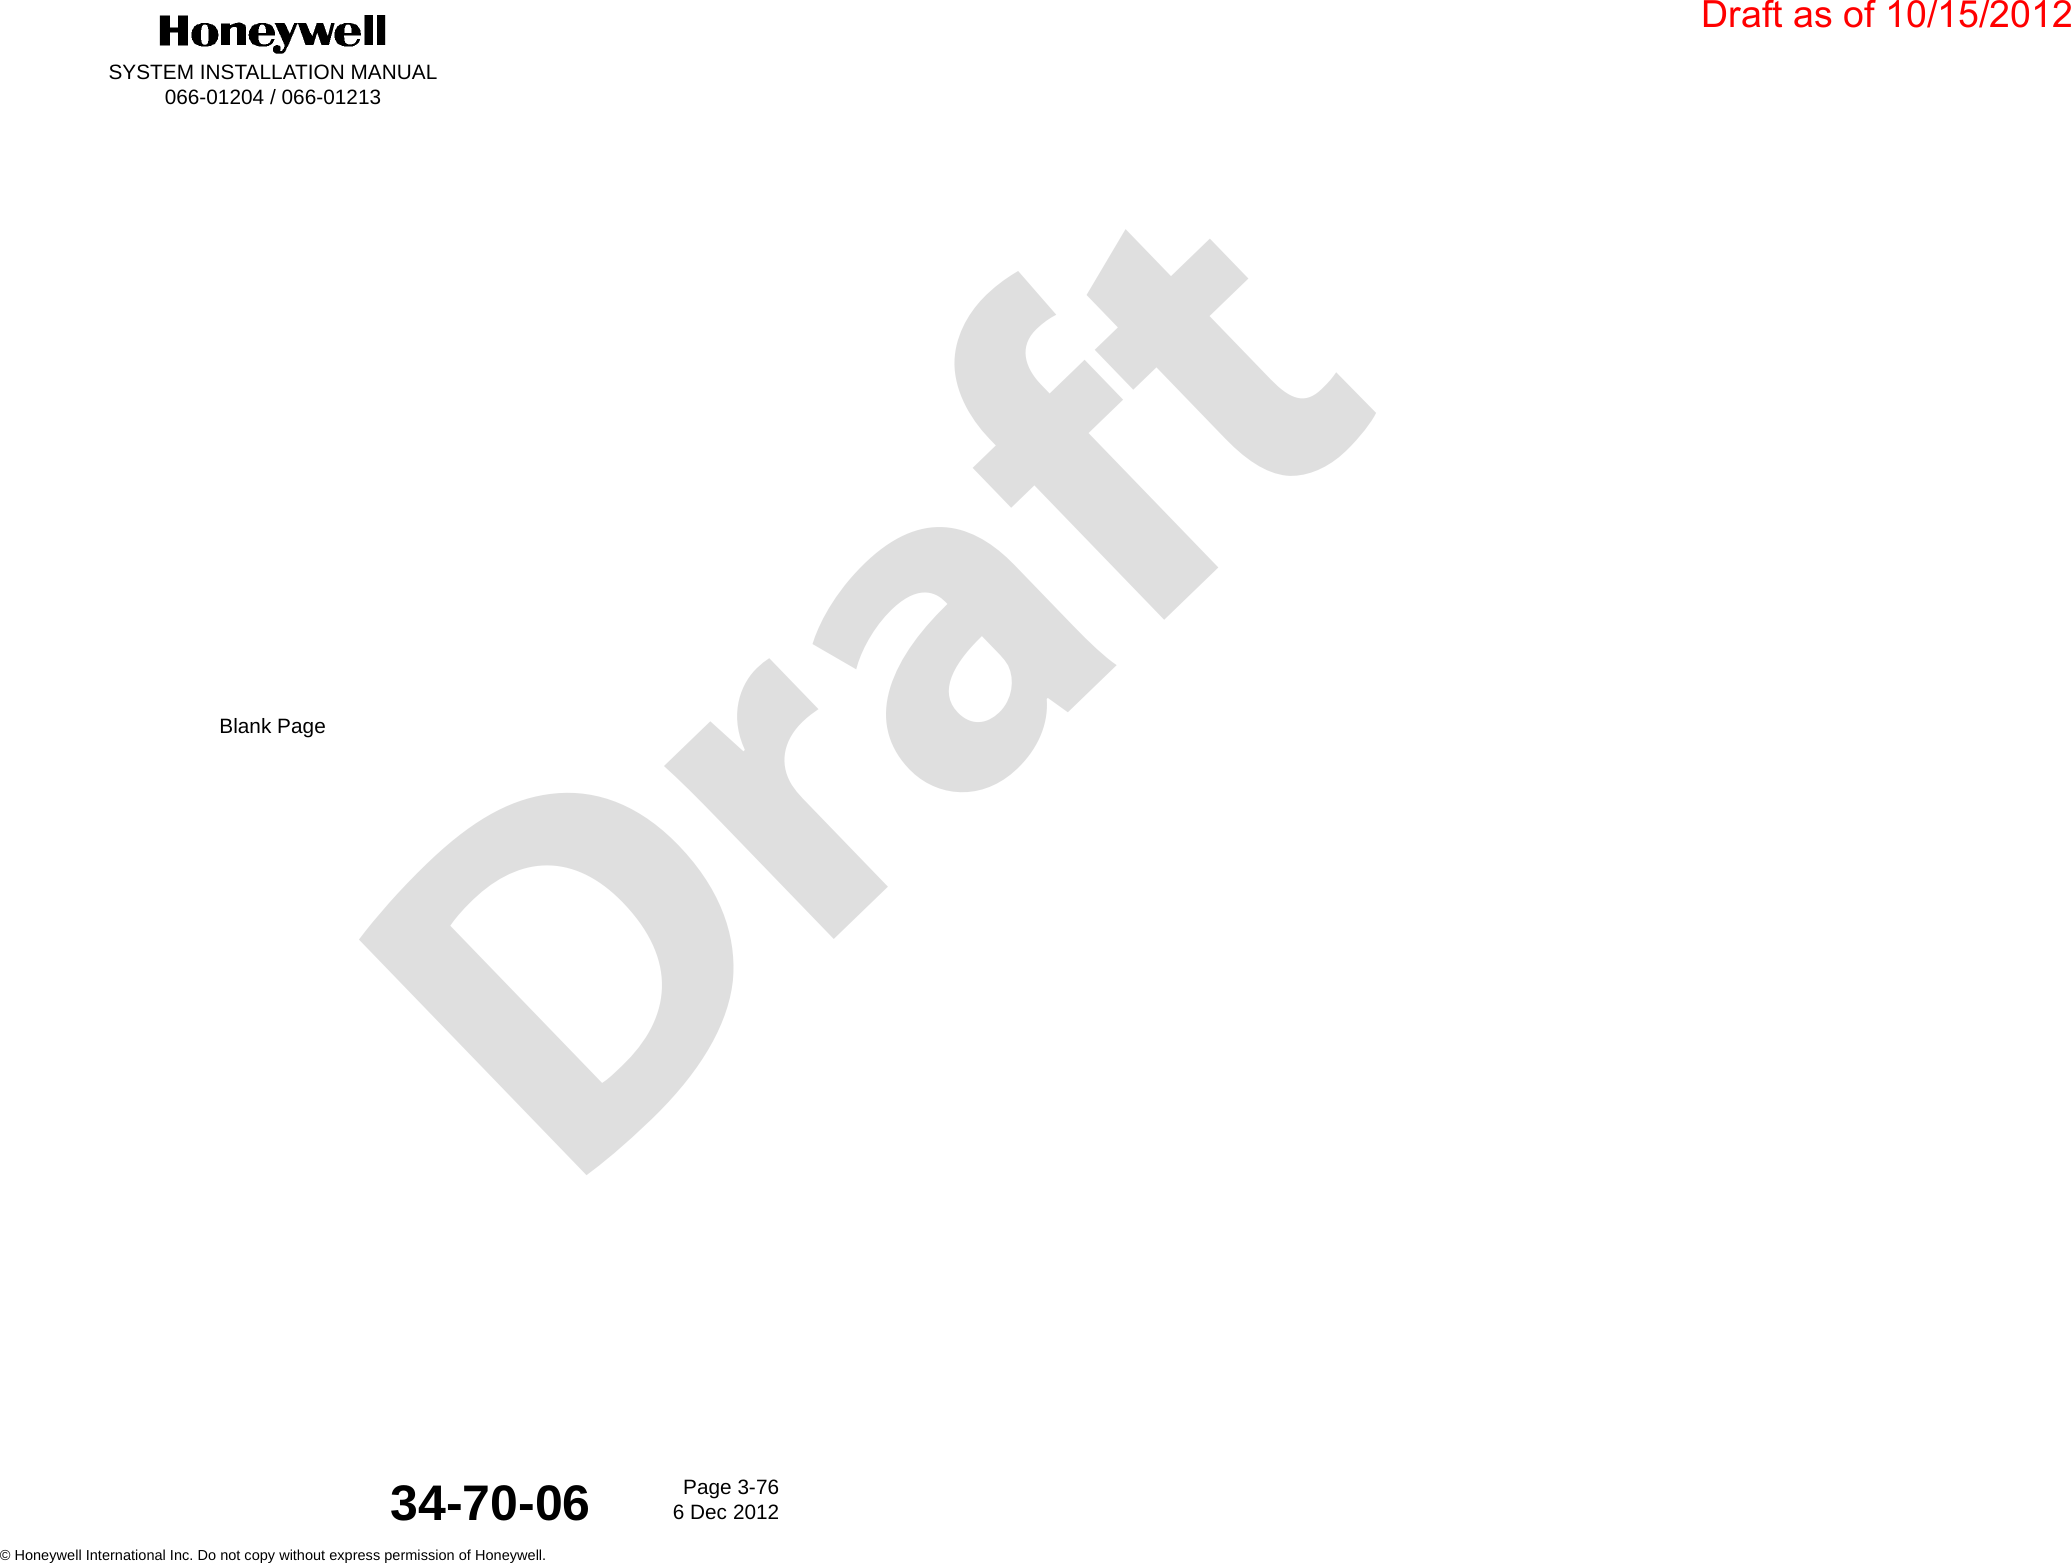 DraftSYSTEM INSTALLATION MANUAL066-01204 / 066-01213Page 3-766 Dec 2012© Honeywell International Inc. Do not copy without express permission of Honeywell.34-70-06Blank PageDraft as of 10/15/2012